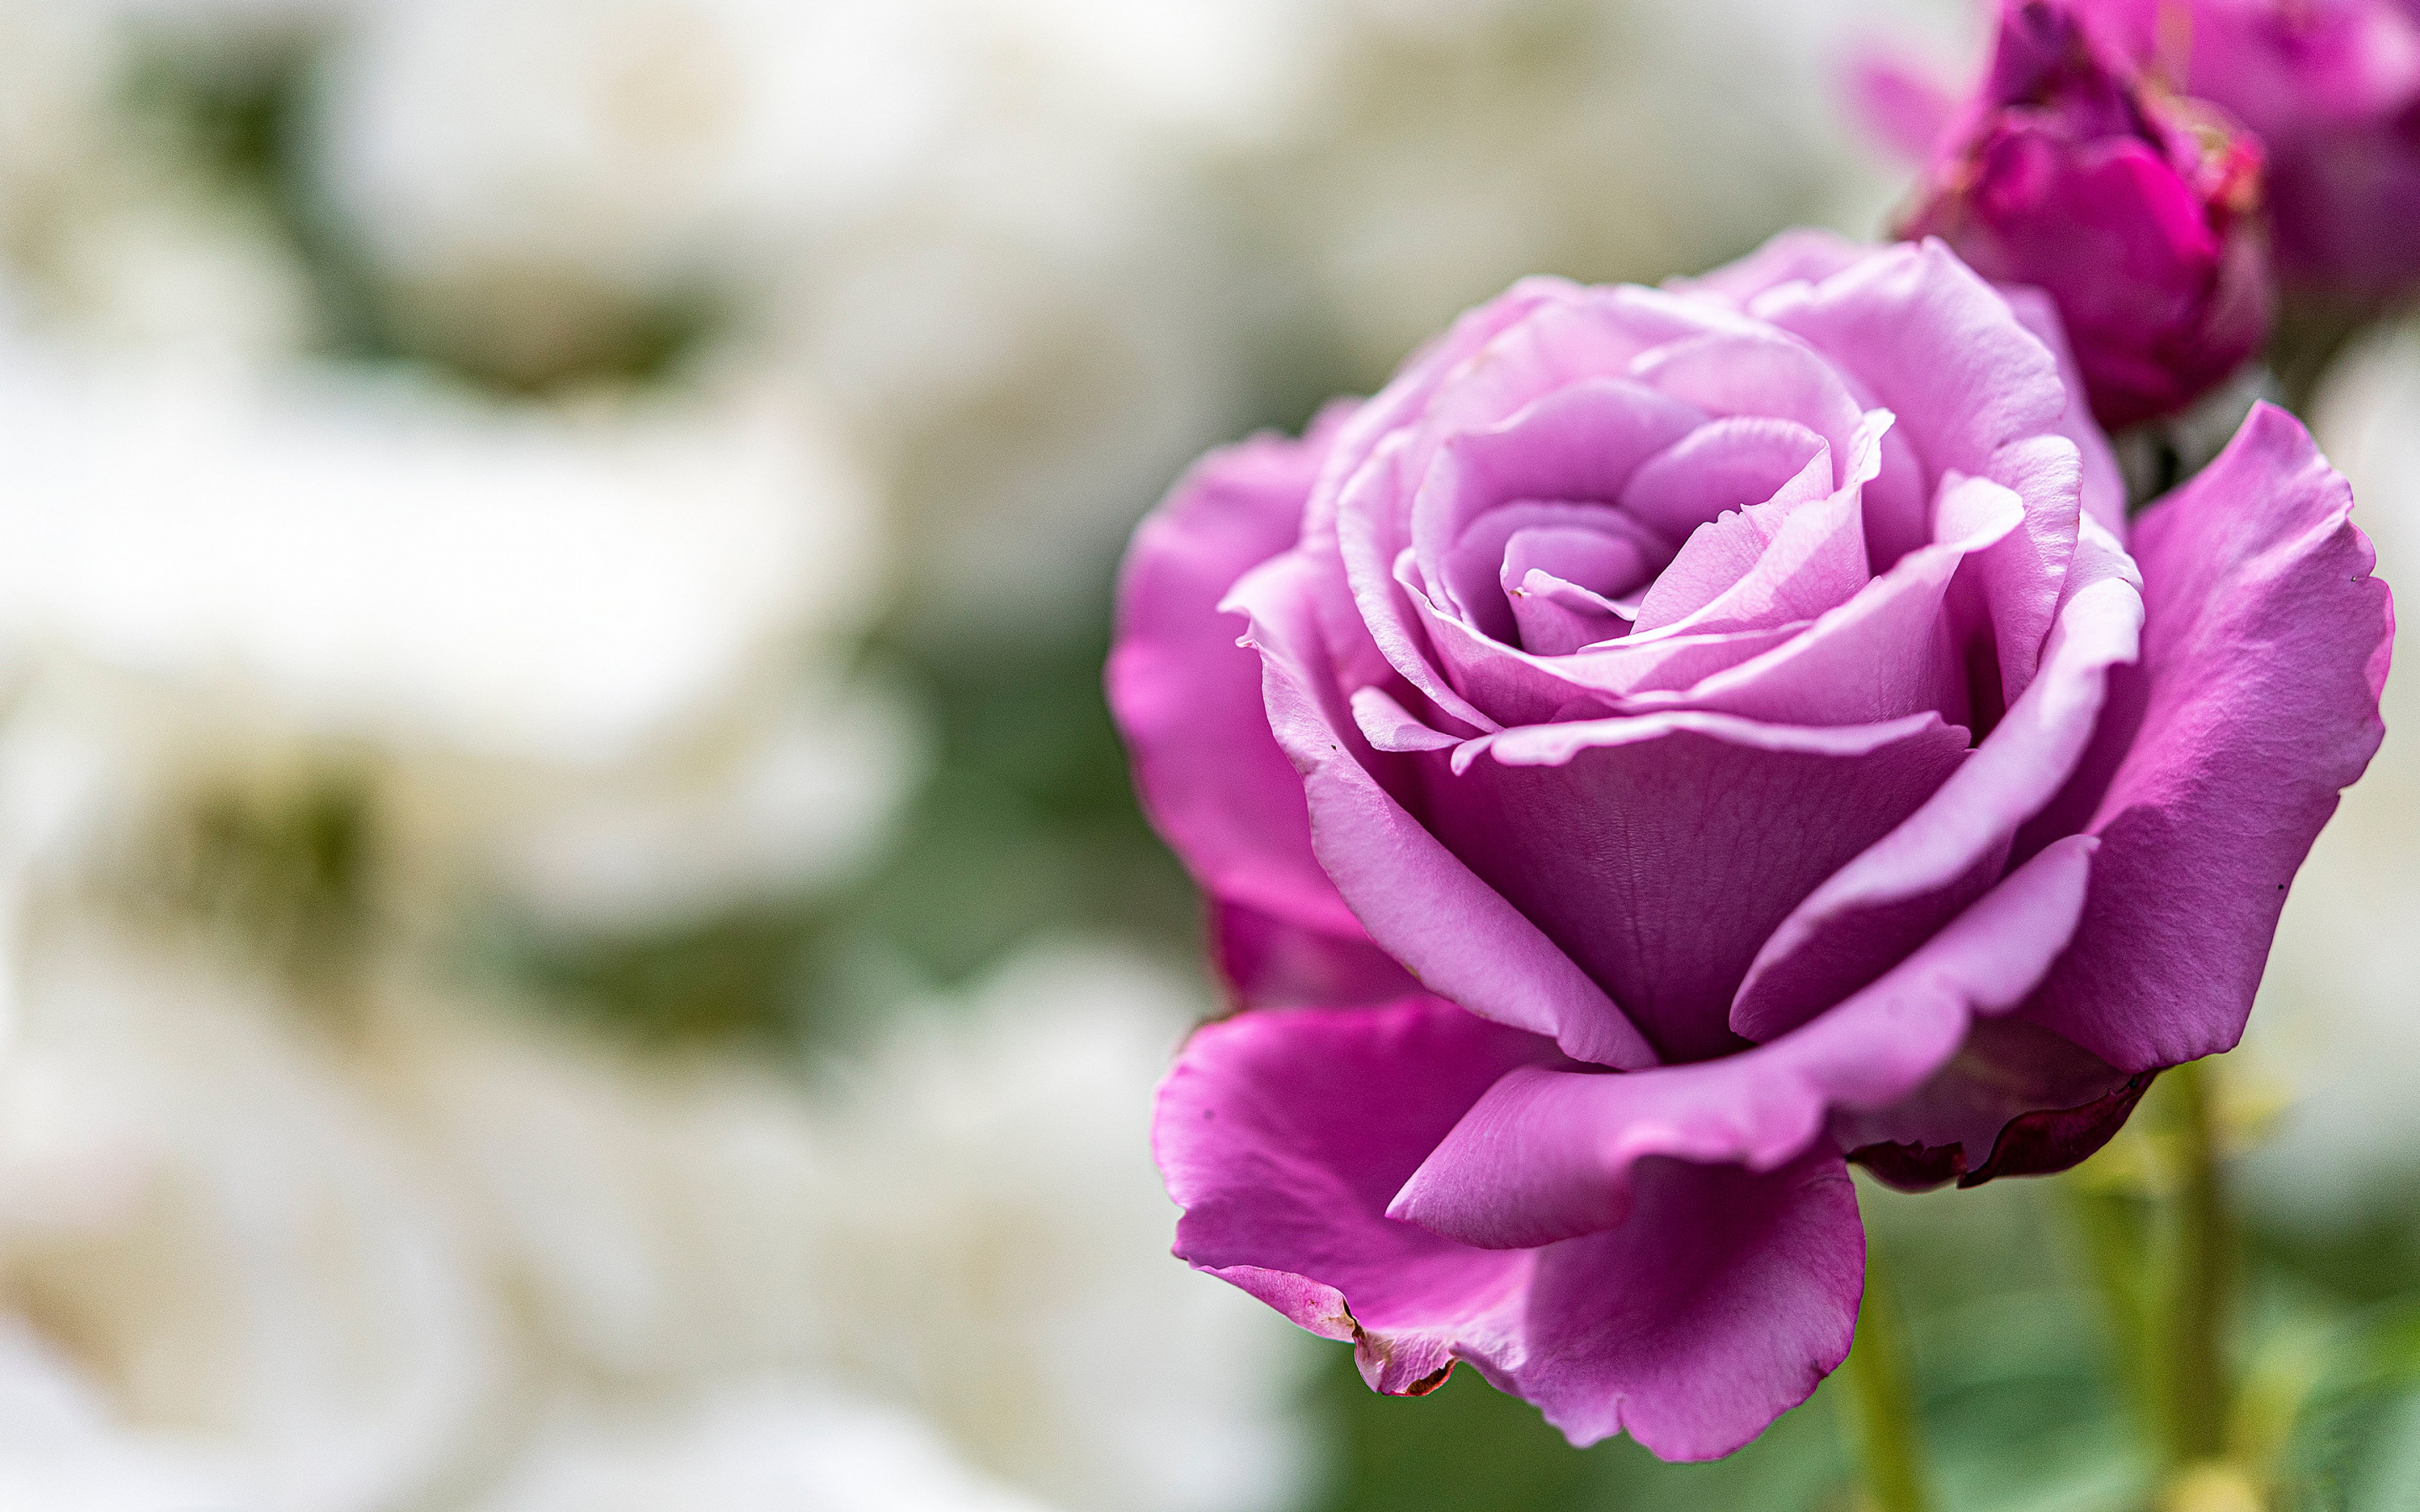 Download wallpapers purple rose, background with roses, beautiful